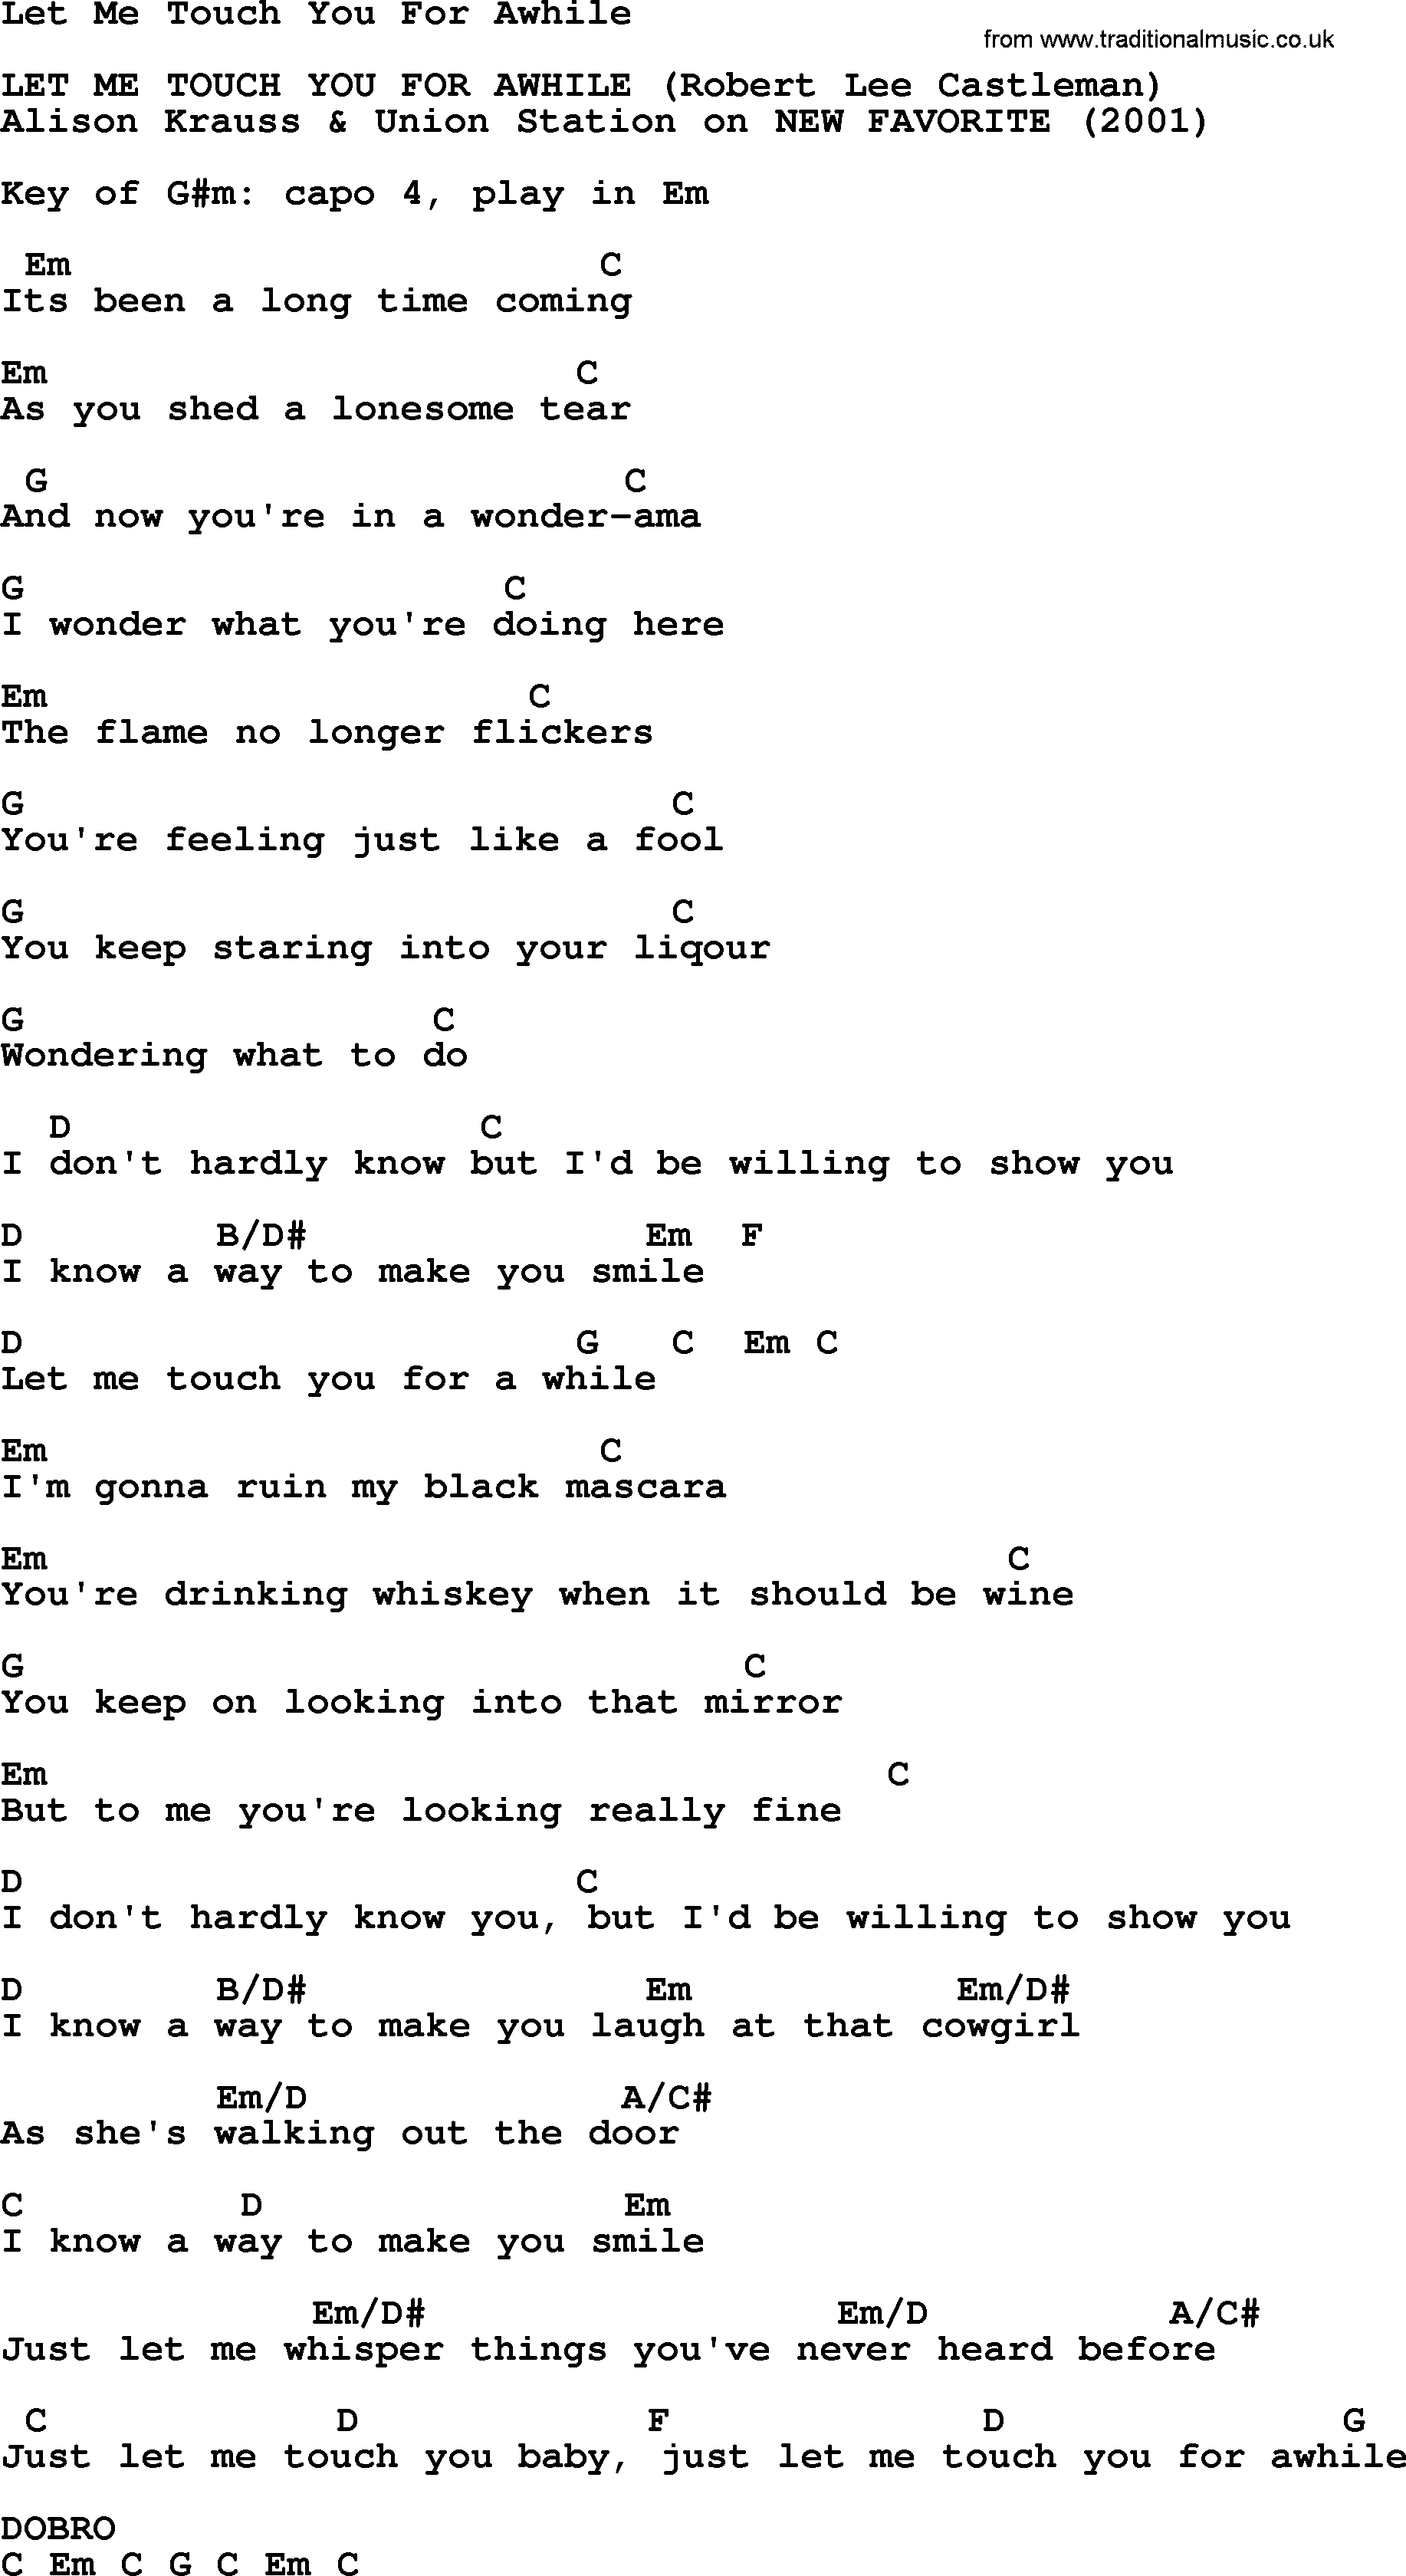 Bluegrass song: Let Me Touch You For Awhile, lyrics and chords